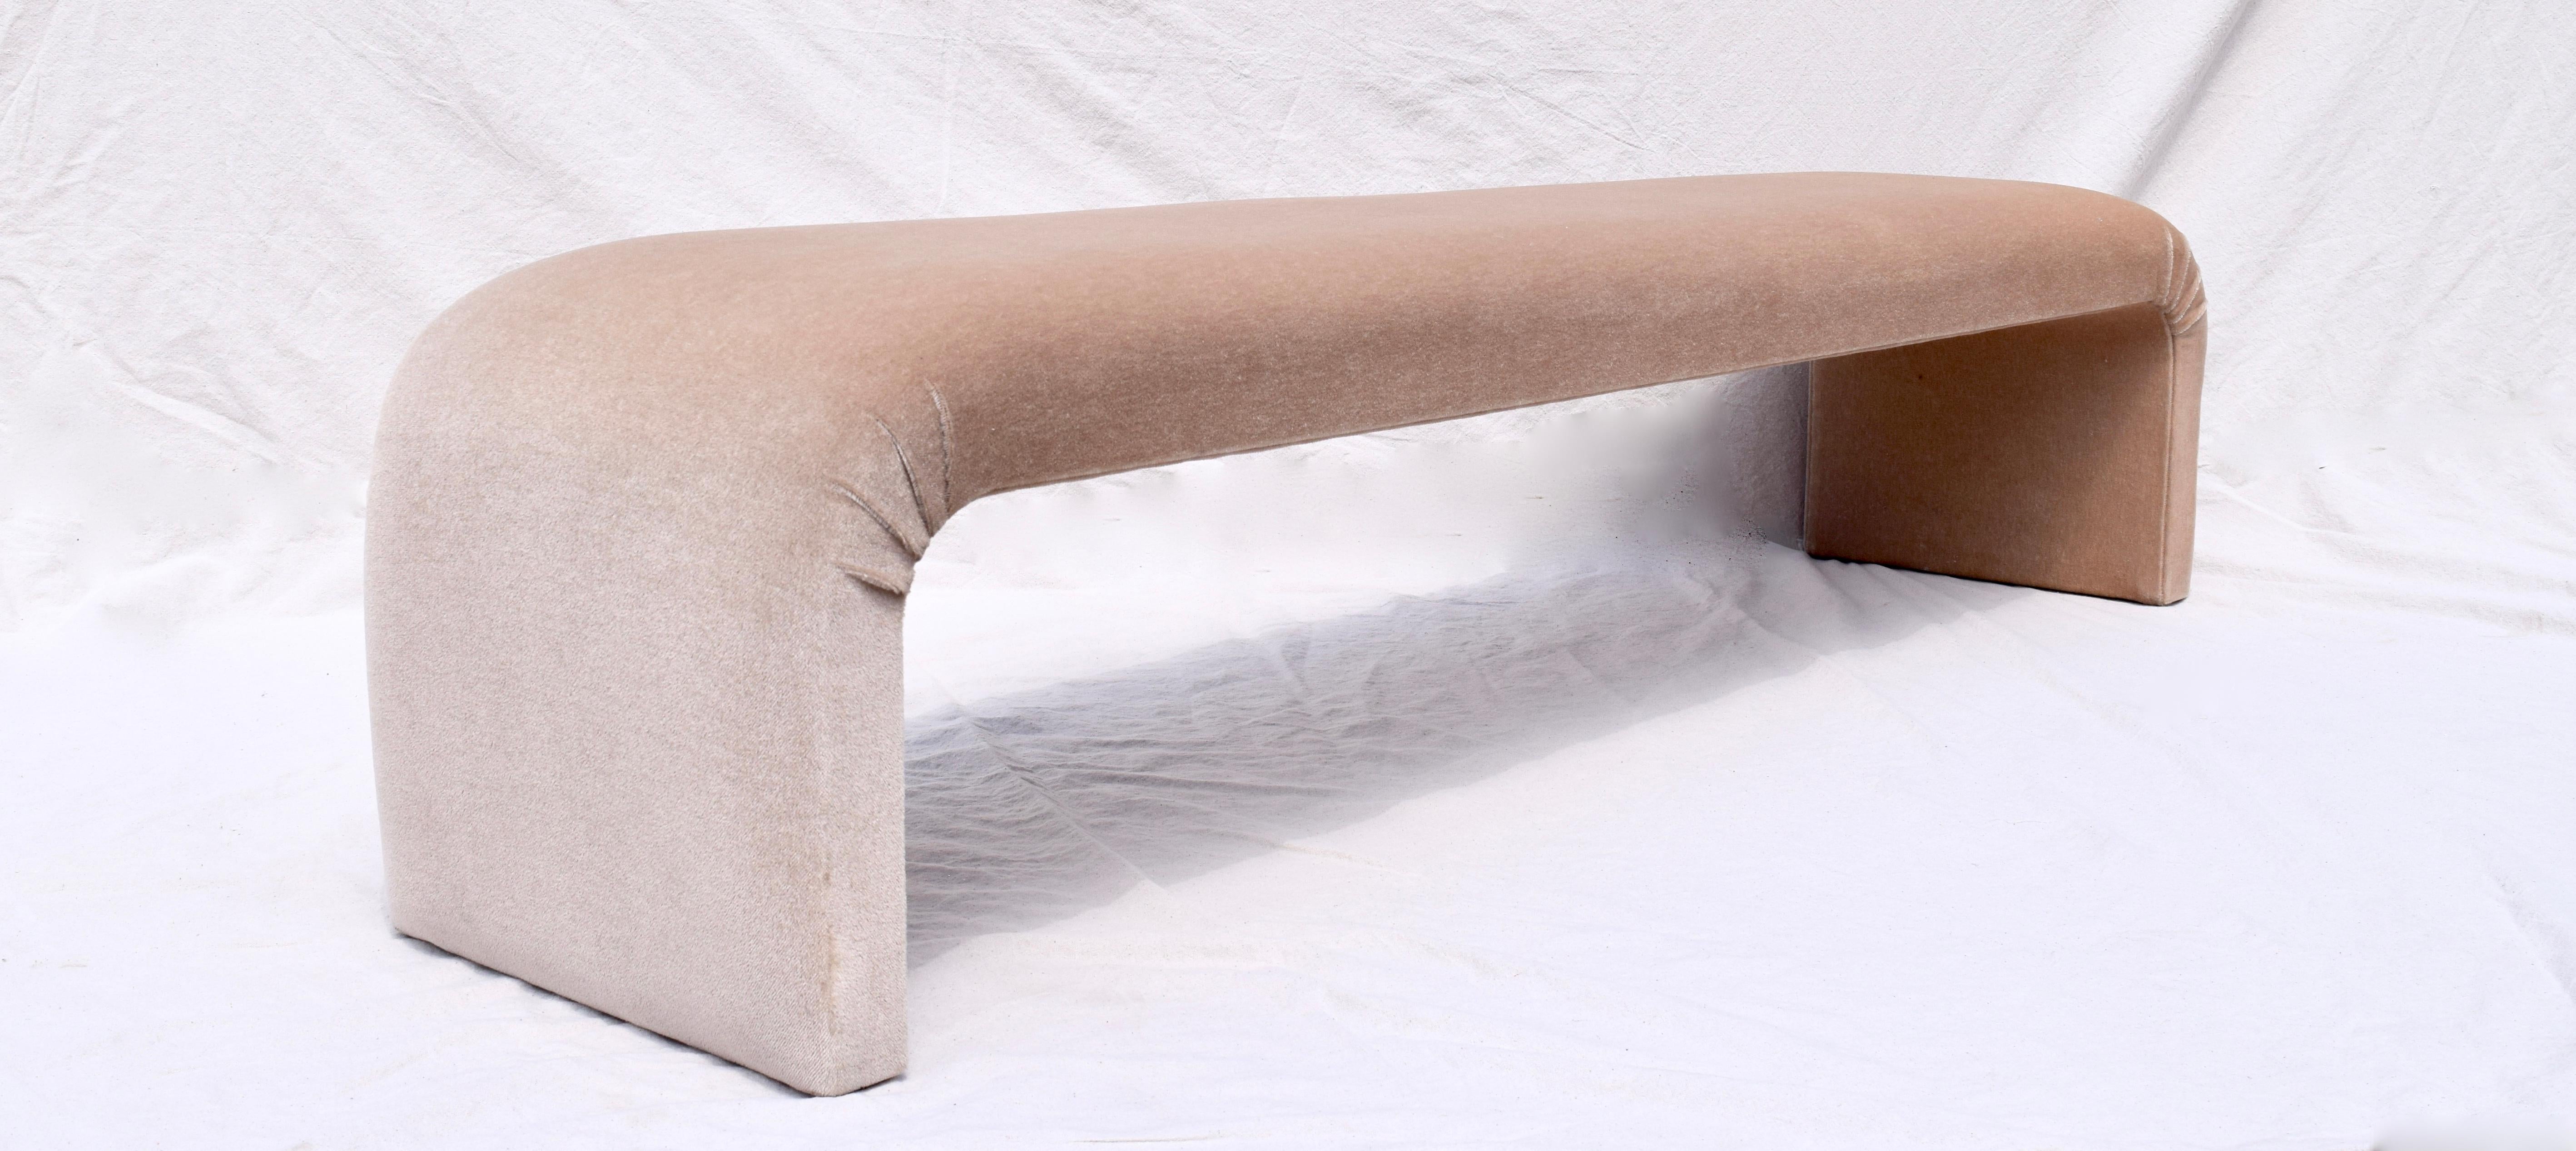 Late 20th Century 1980s Hollywood Regency Contemporary Waterfall Bench